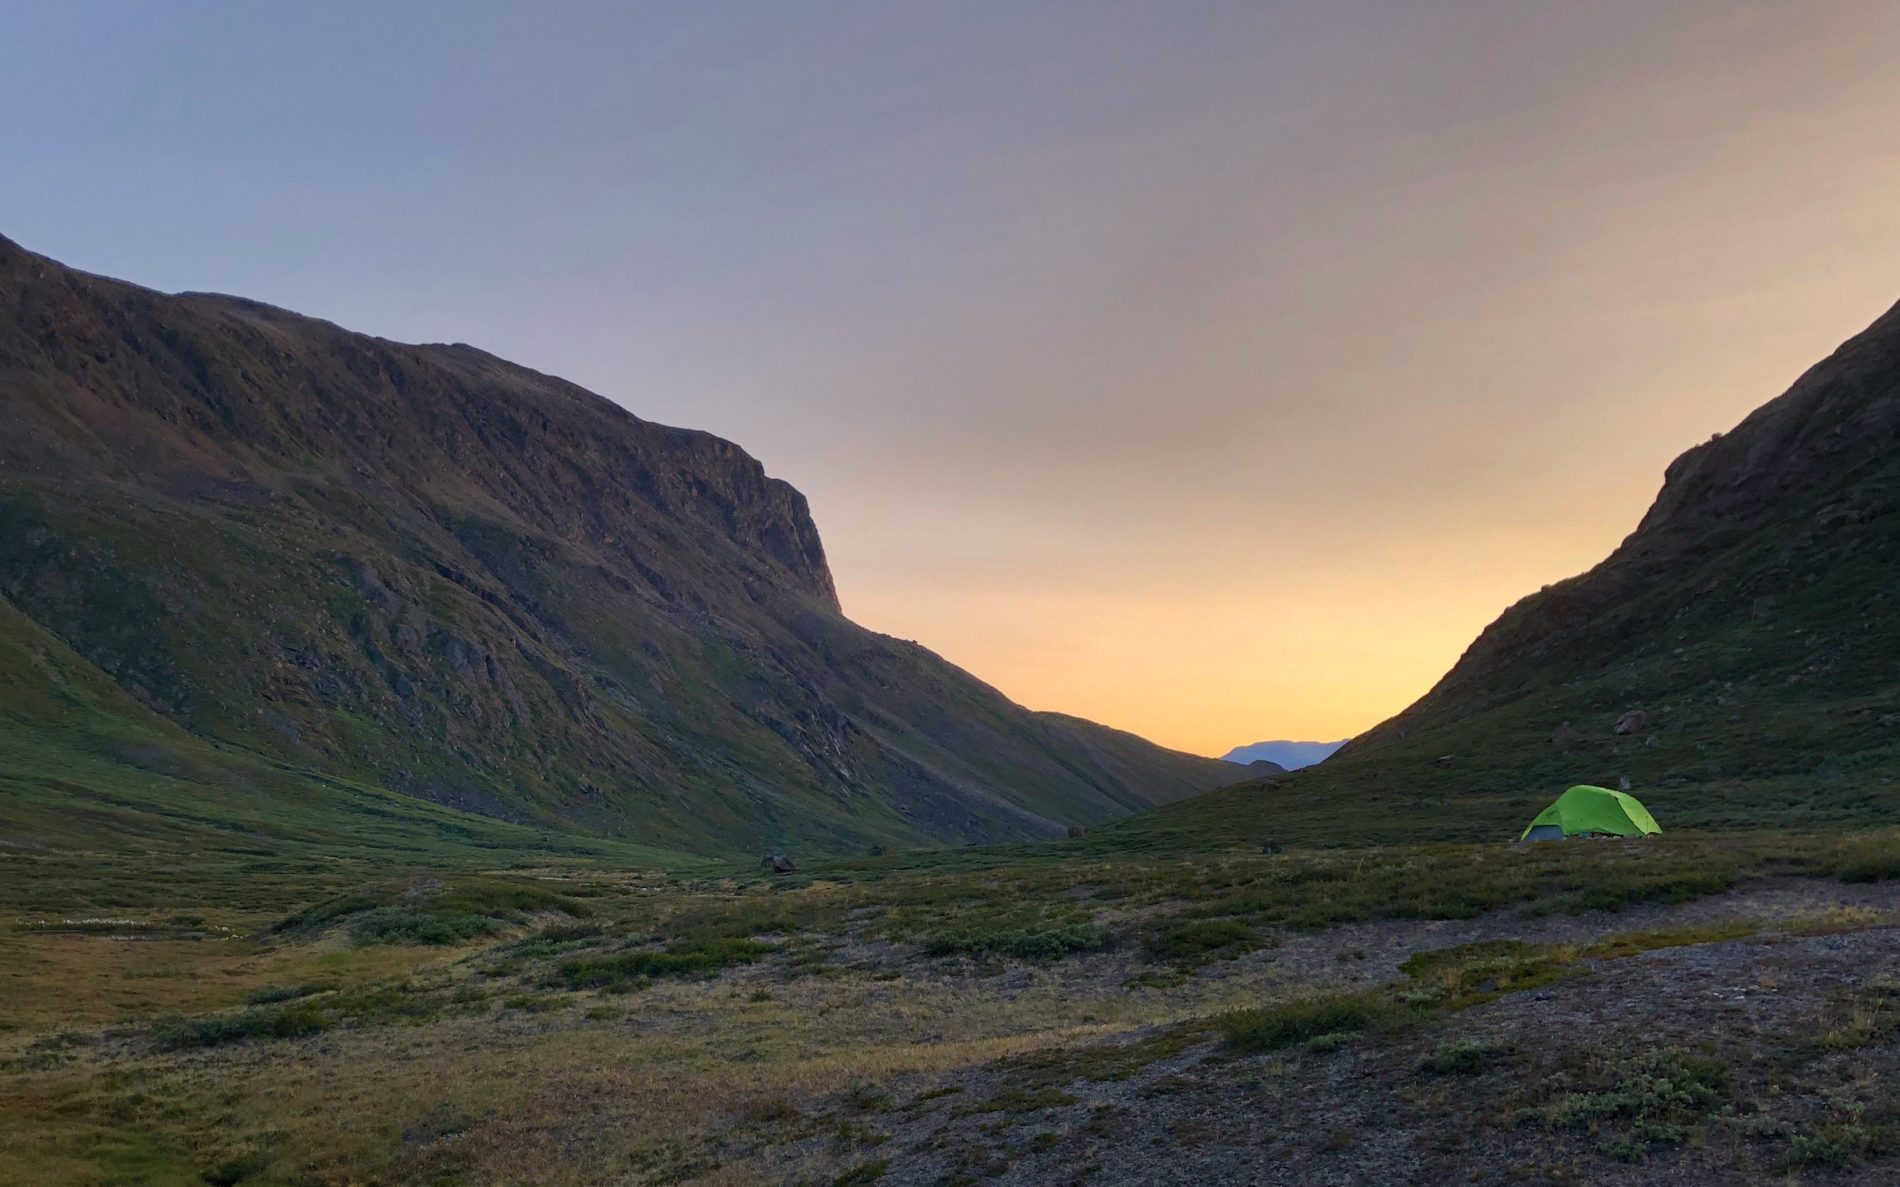 Wild camping at sunset along the Arctic Circle Trail. You must have the correct tent and other gear for this trek.